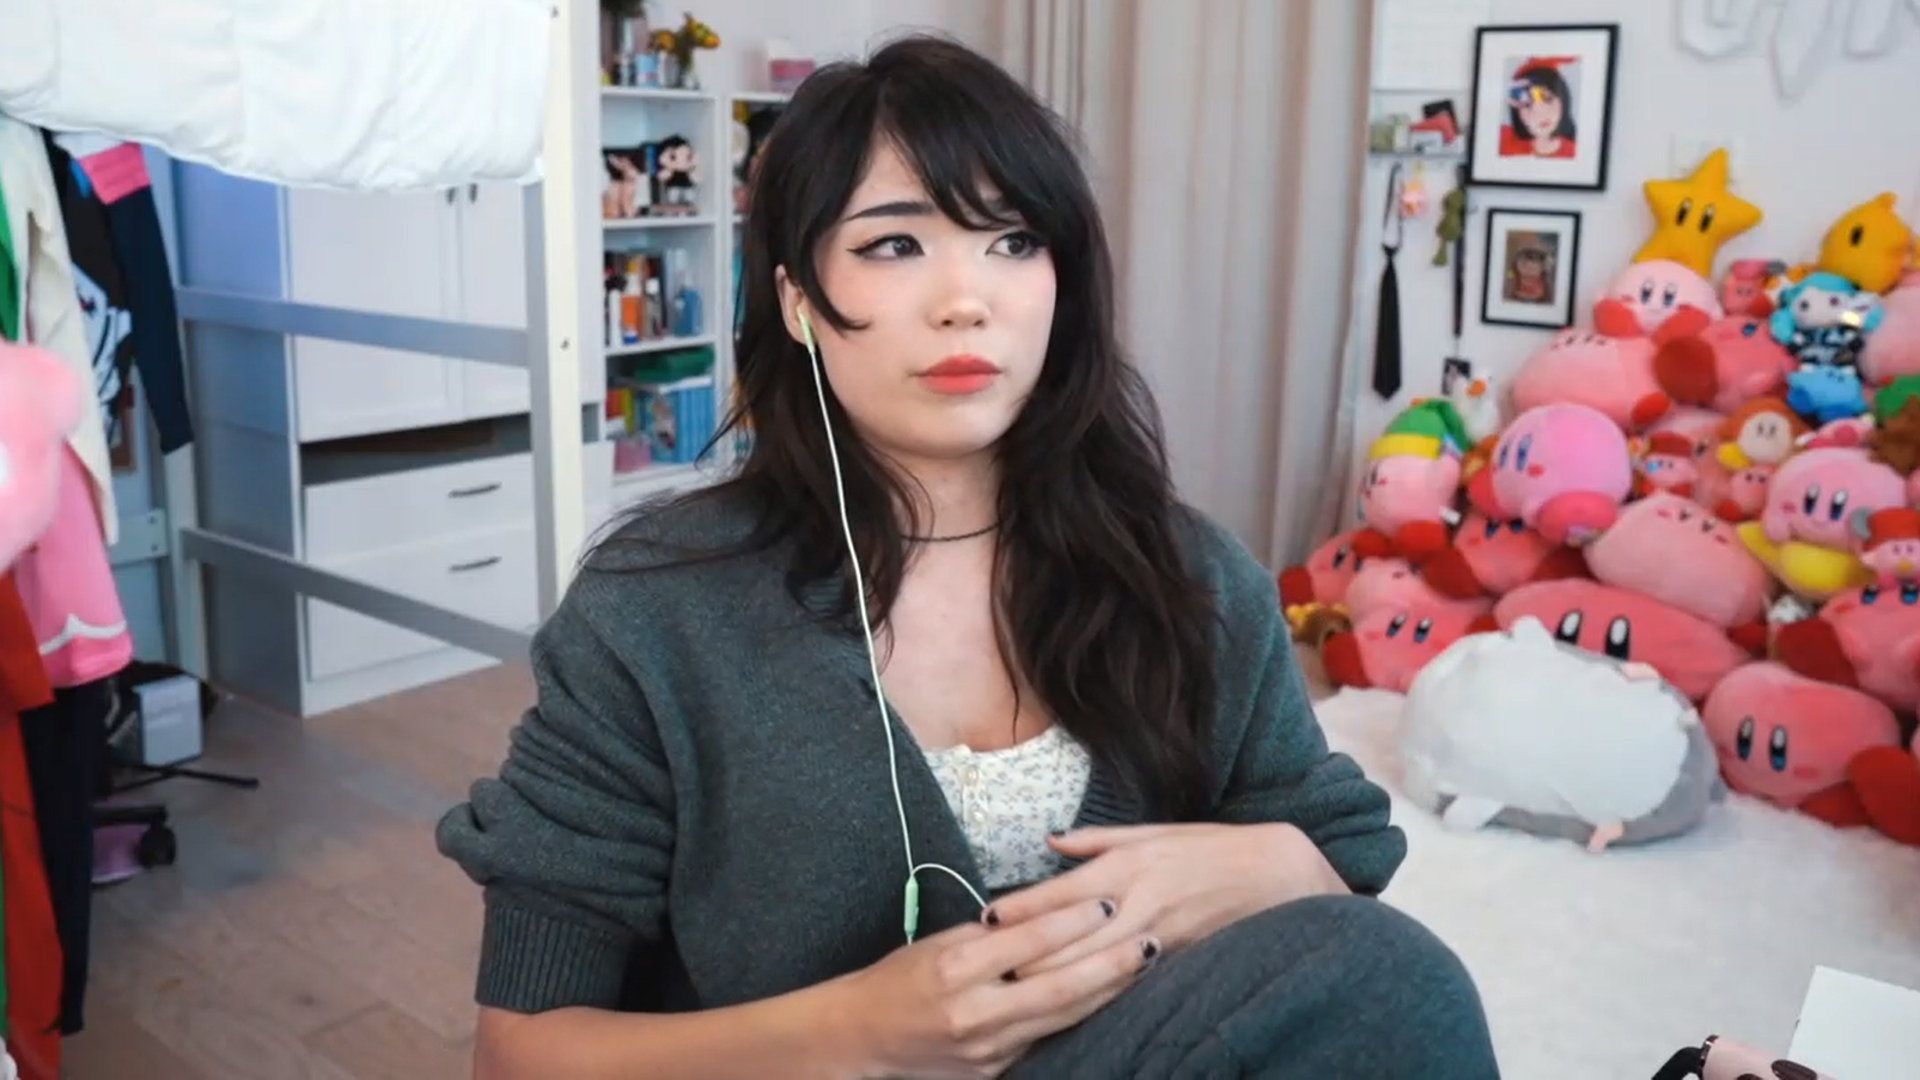 Streamer Emiru Denounces Dealing With Sexual Harassment On Twitch: "It Makes Me Sick"